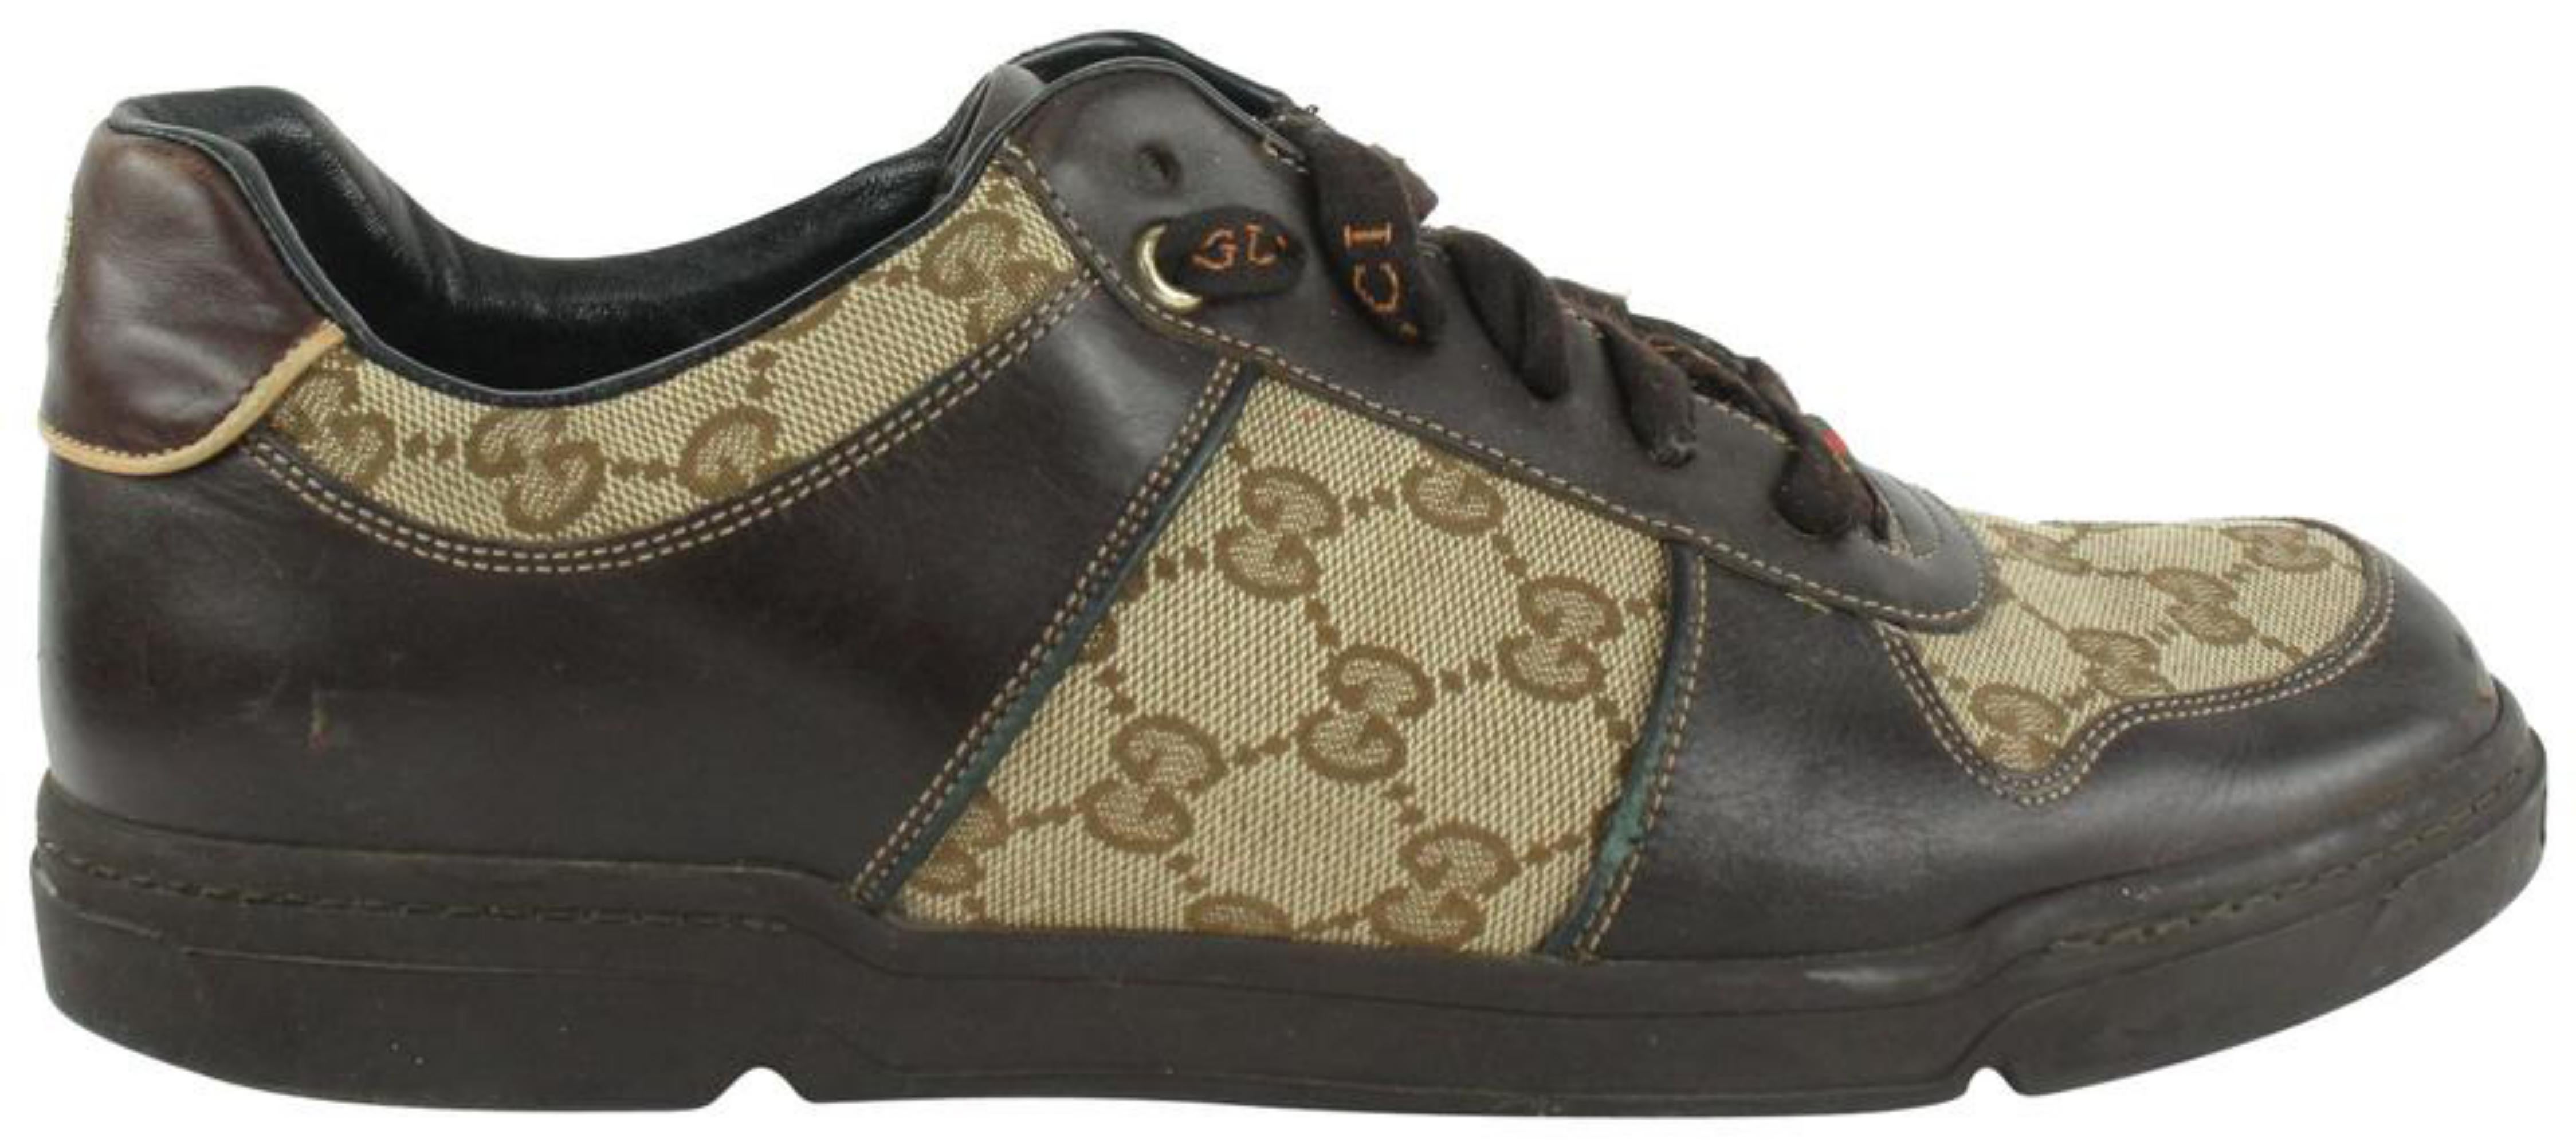 Gucci Men's 9 US Brown Monogram GG Signature Lace Low Sneakers 1216g50
Date Code/Serial Number: 162961
Made In: Italy
Measurements: Length:  11.8